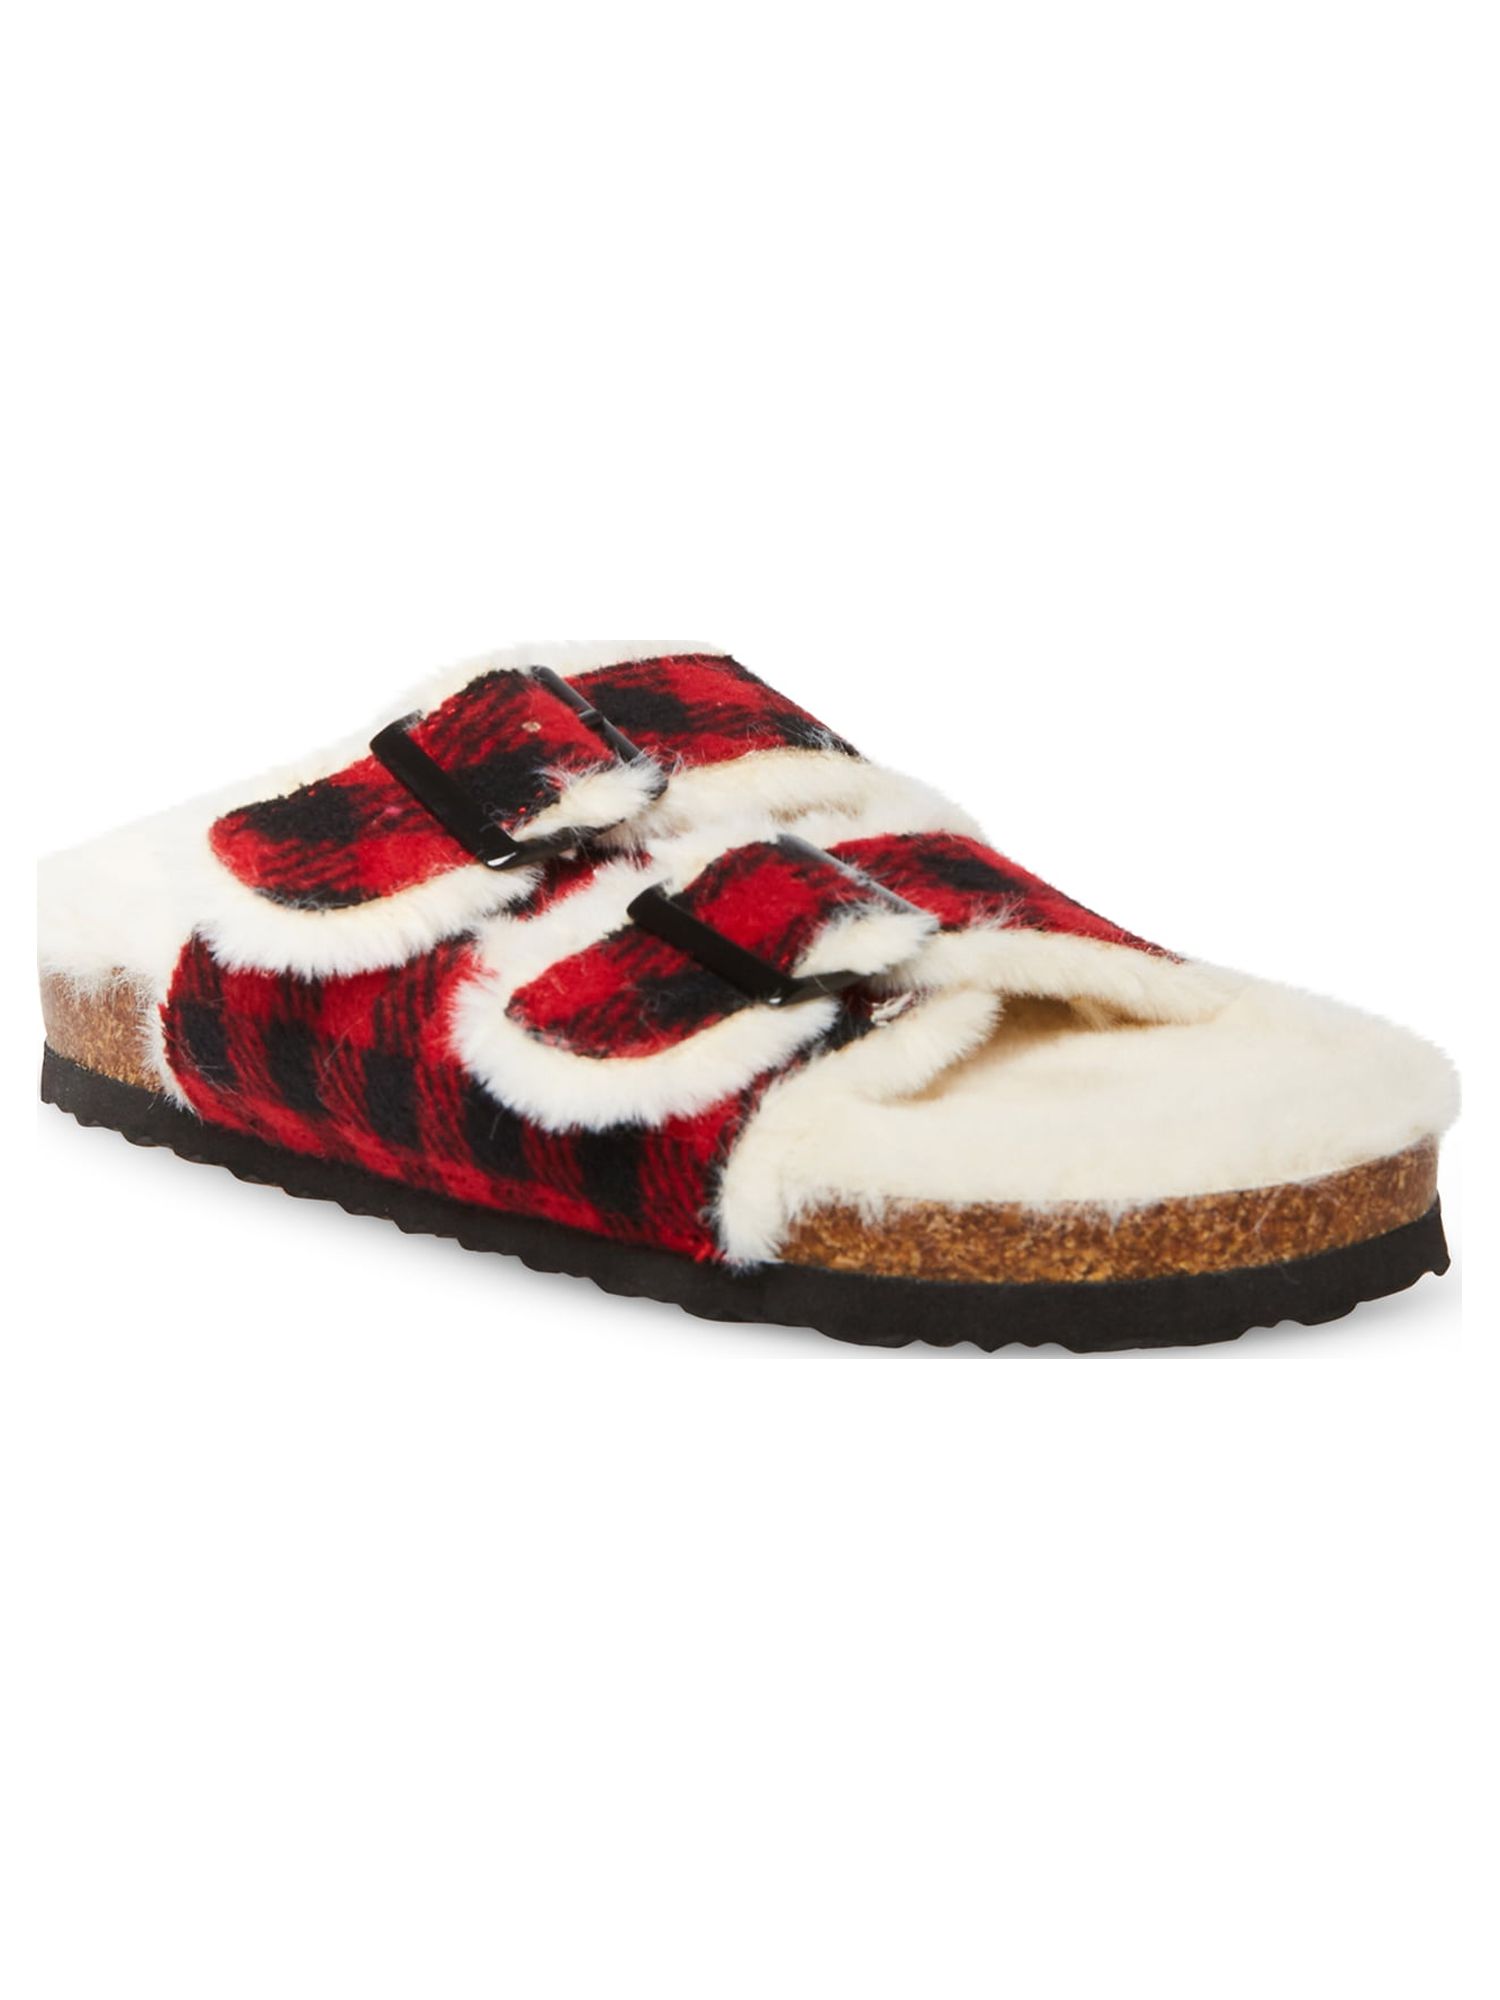 Steve Madden Girls Youth Faux Fur Footbed Sandal, Sizes 13-5 - image 1 of 2